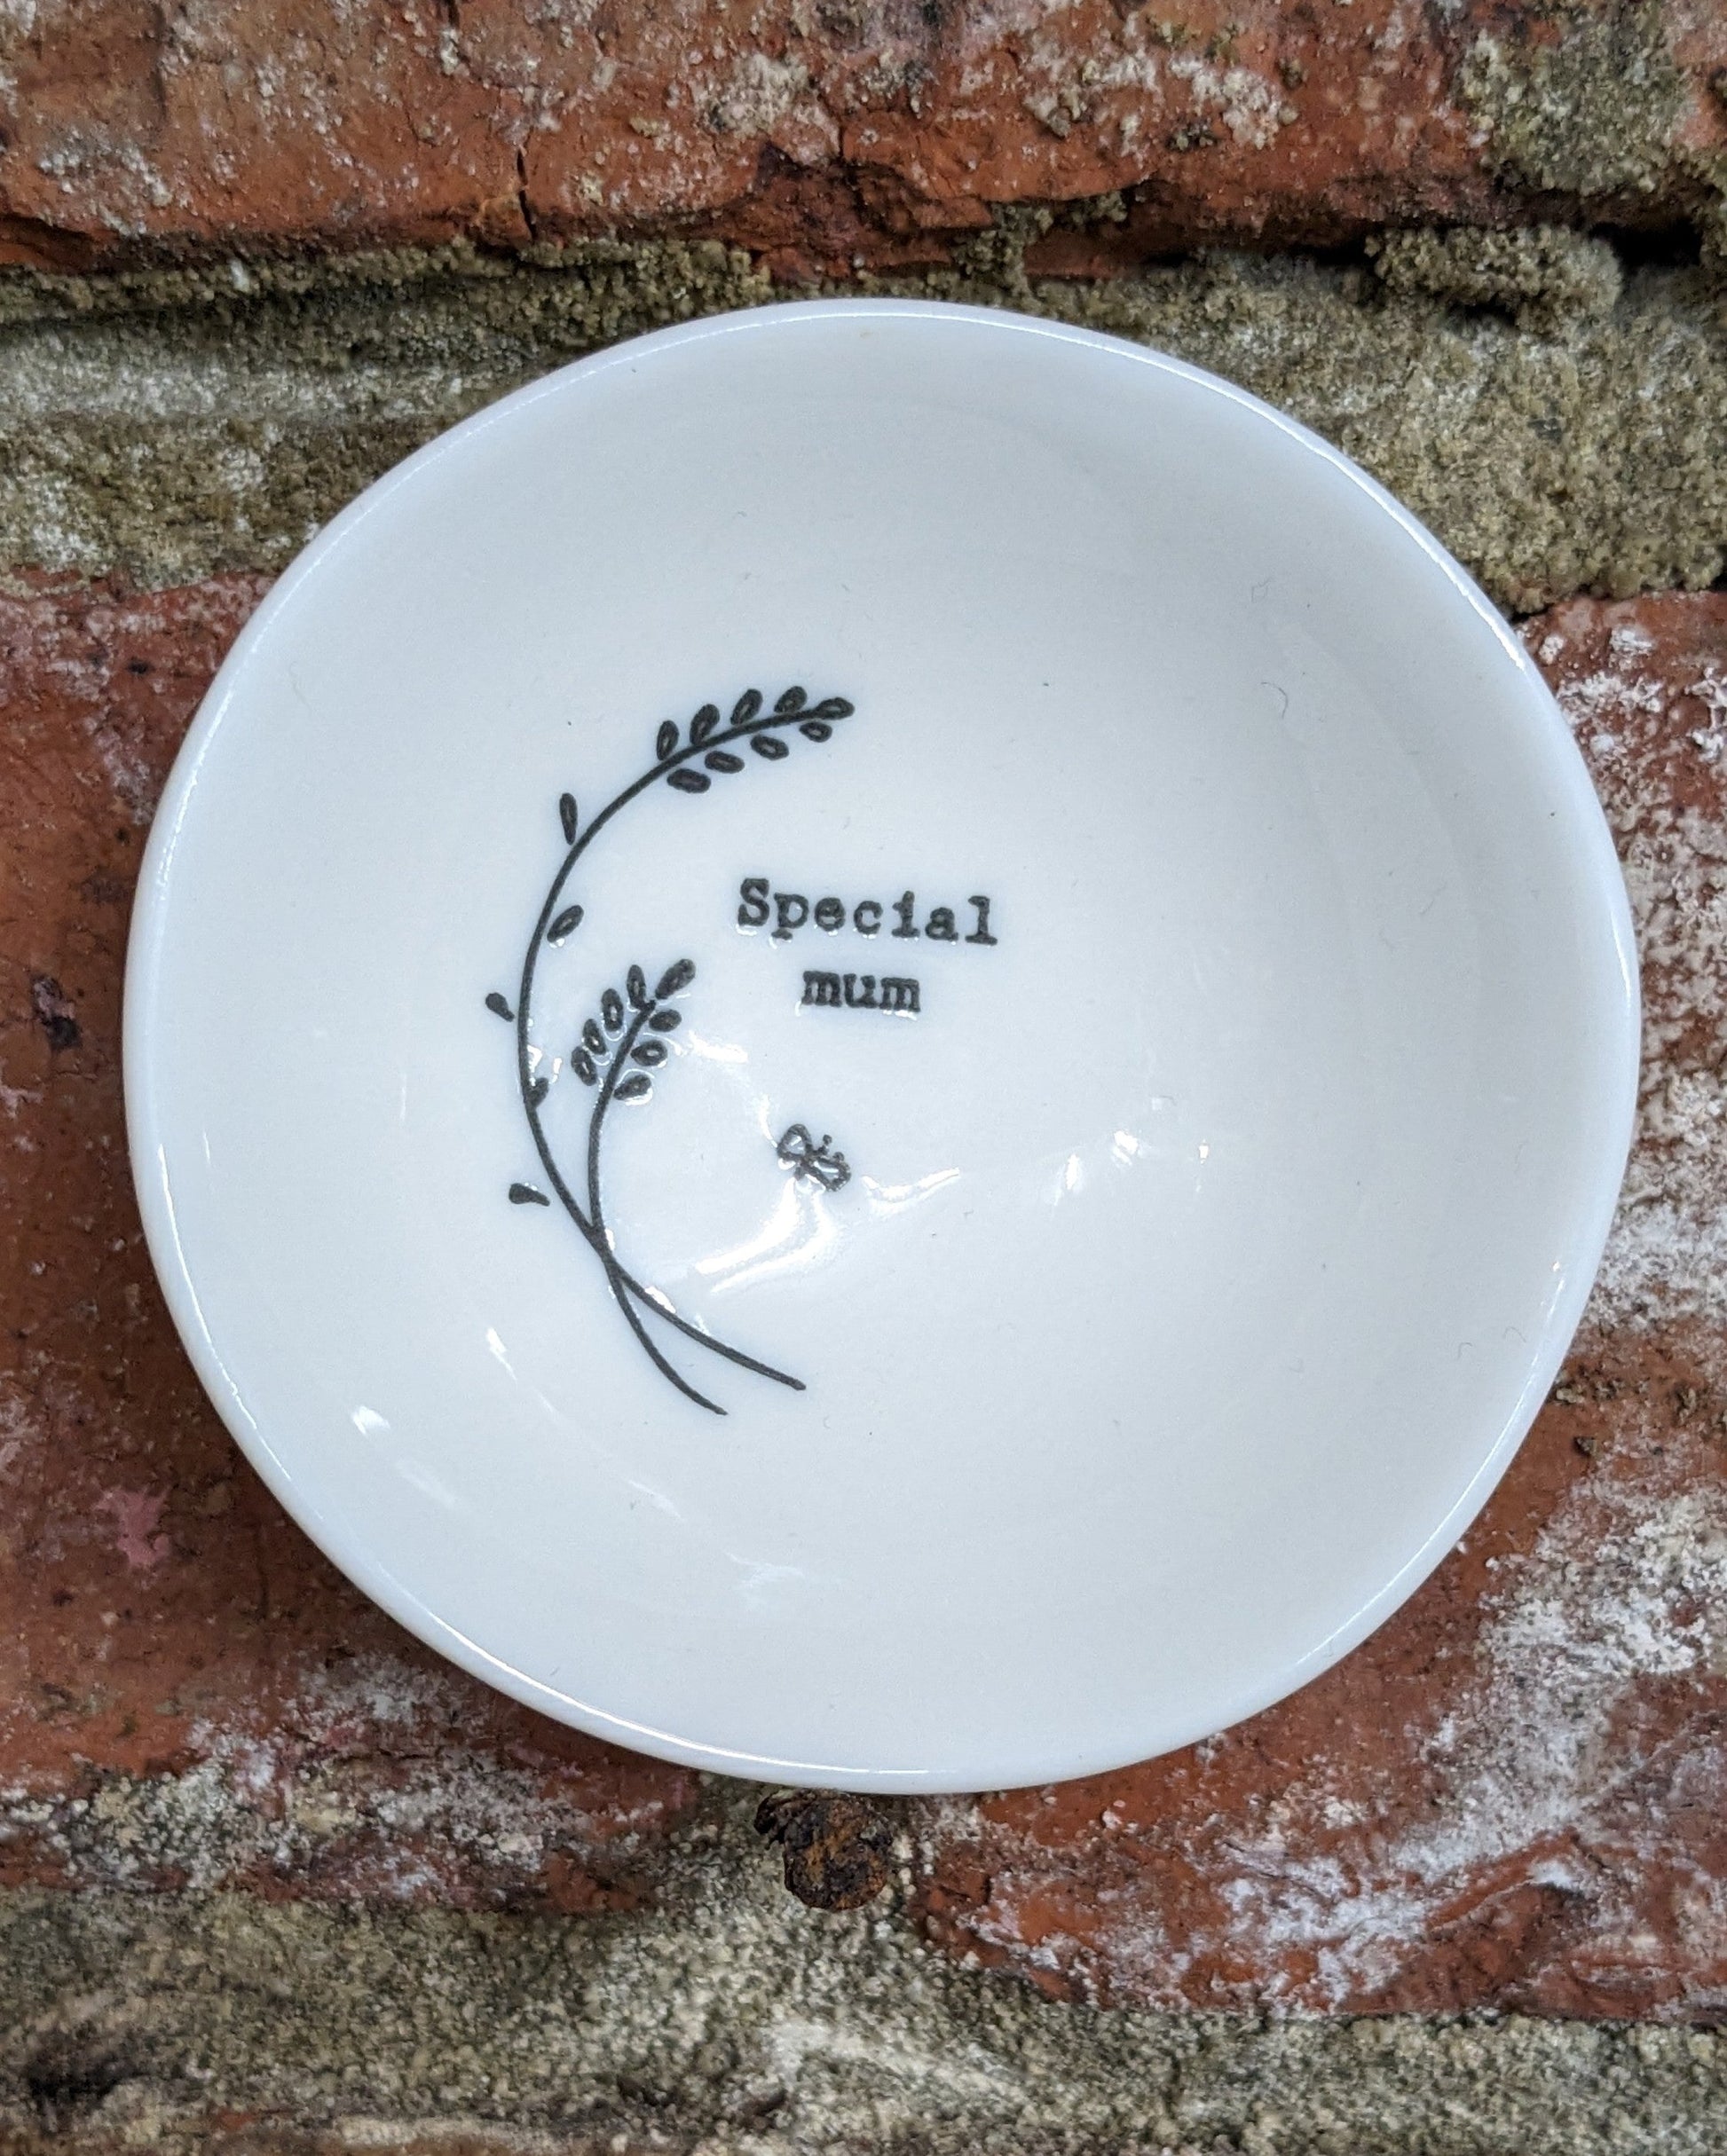 Special mum trinket dish - Quality Flowers from Ann's Flowers - Just £4.99! Shop now at Ann's Flowers